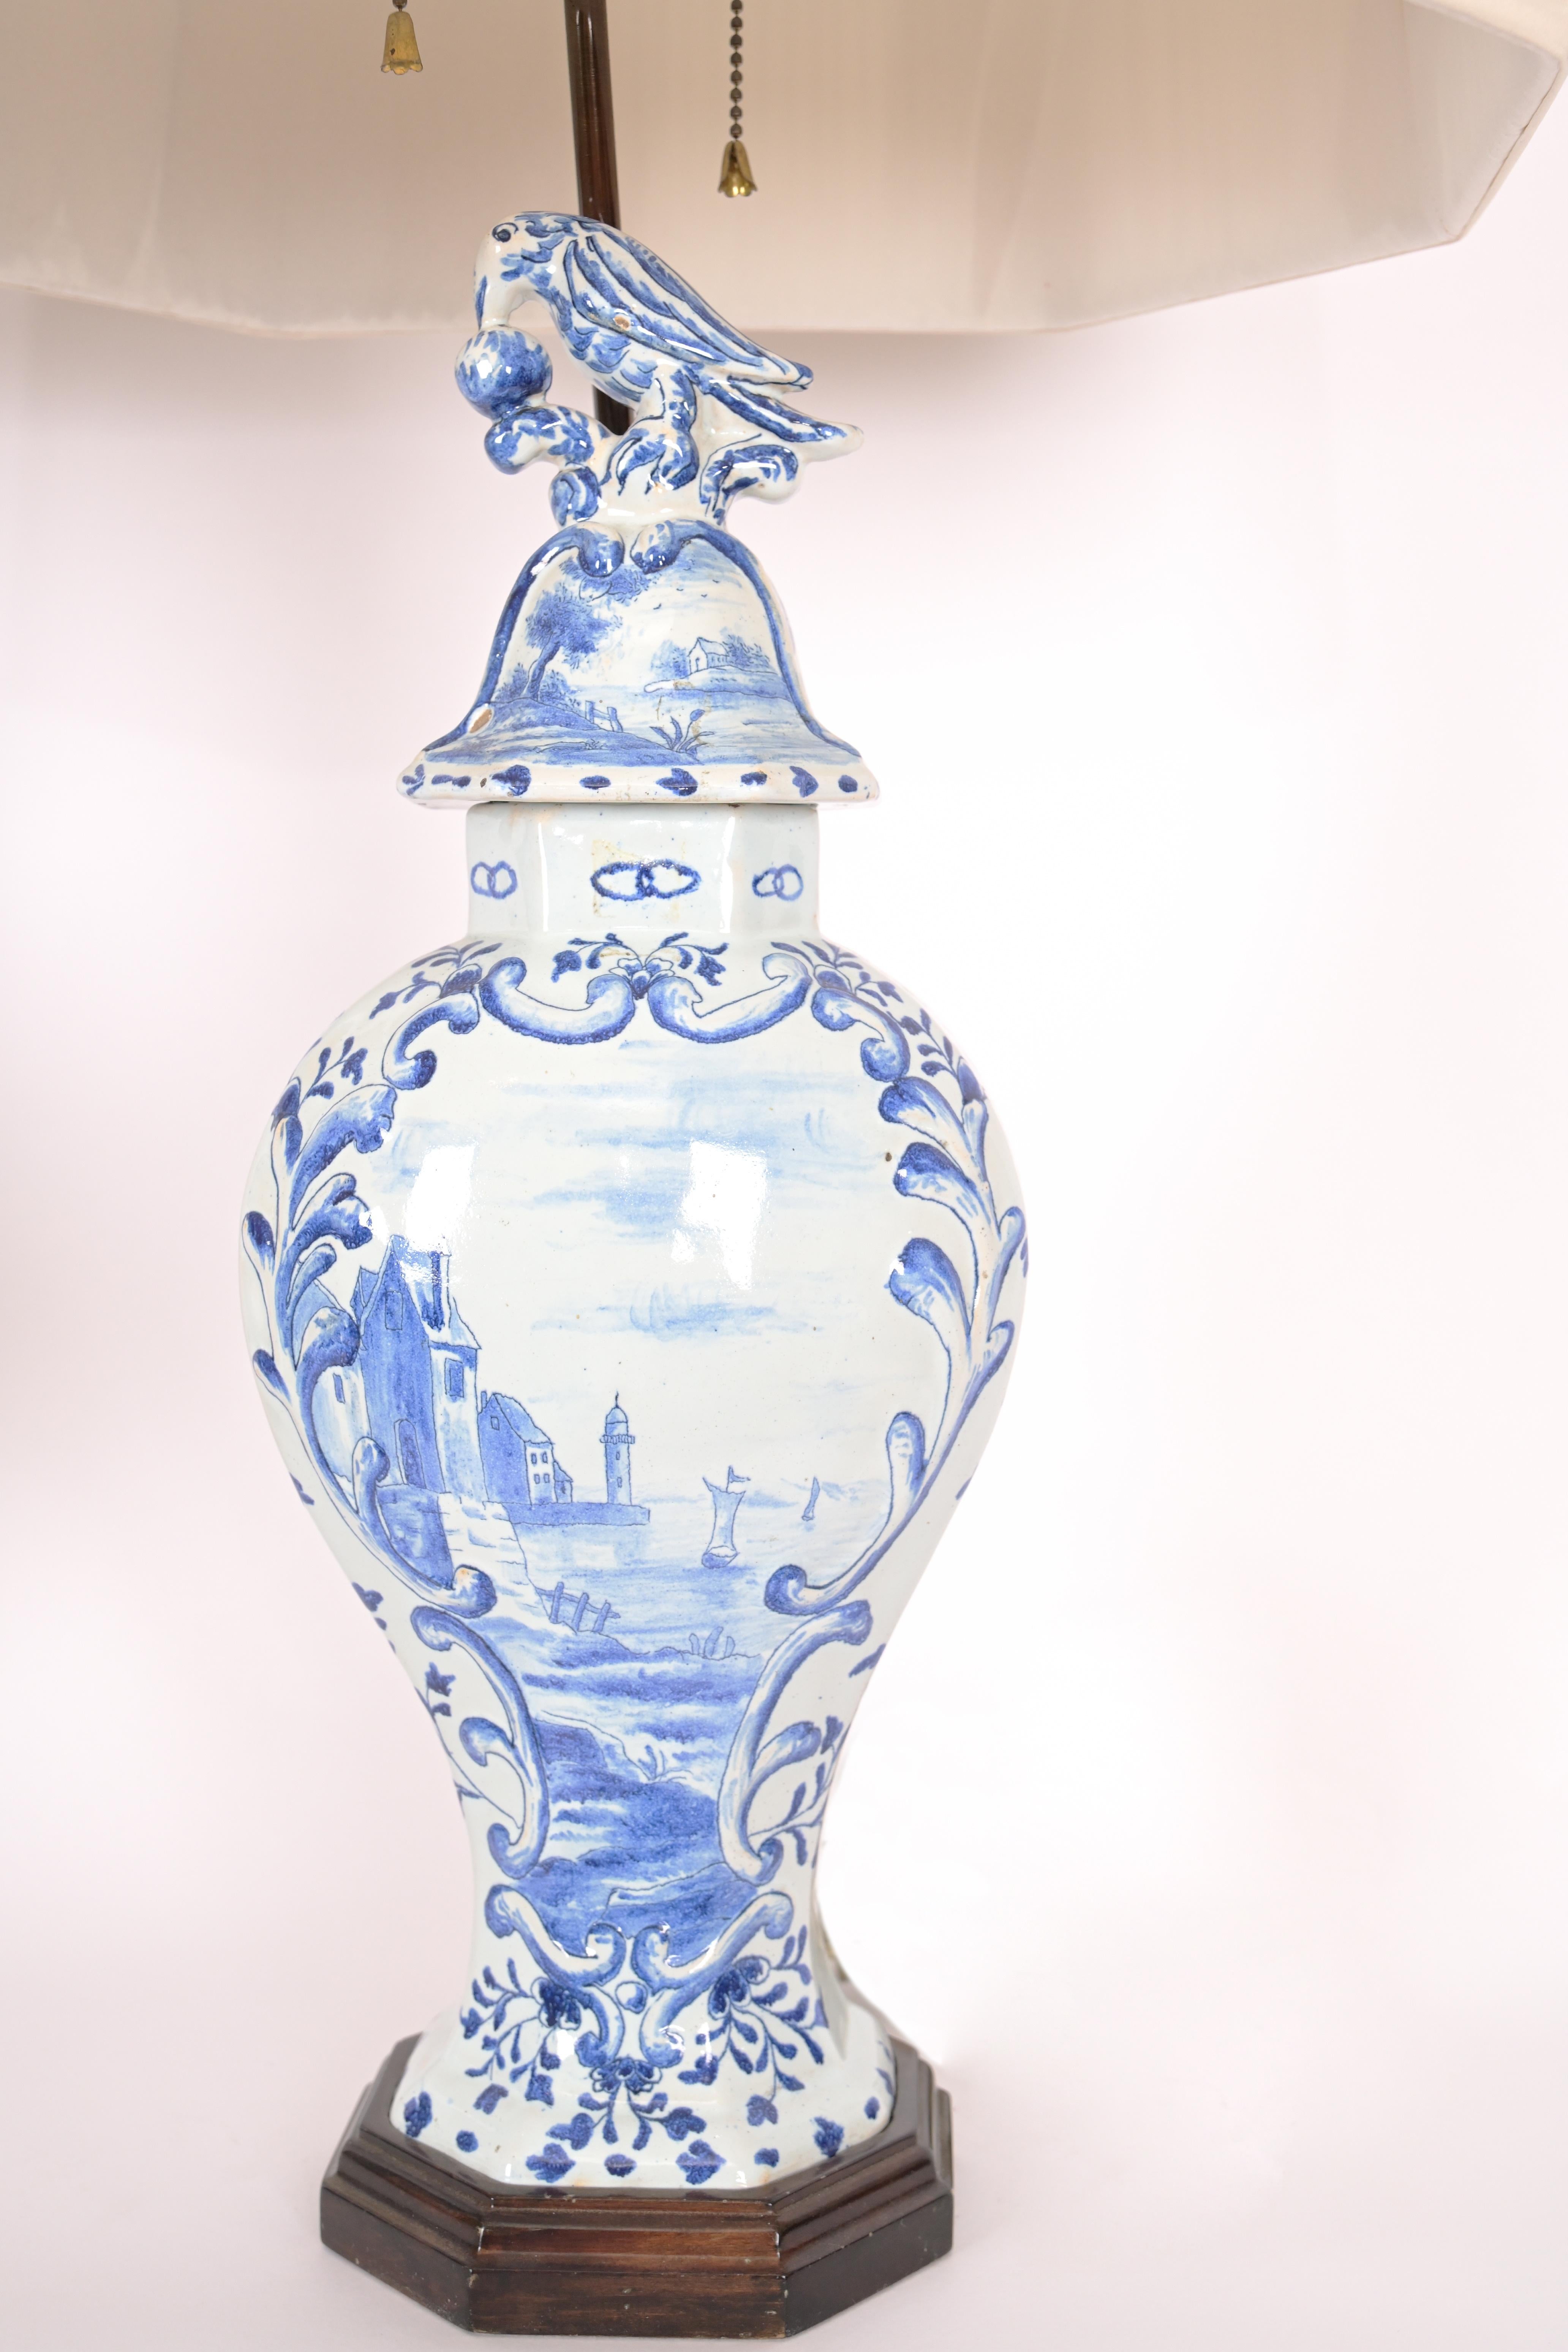 A pair of 19-century delft vases with traditional decoration with blue on white with mounted black painted bases and birds perched on the lids. Lamps mounted with special with brass wiring conforming to the silhouette feature. Now electrified with